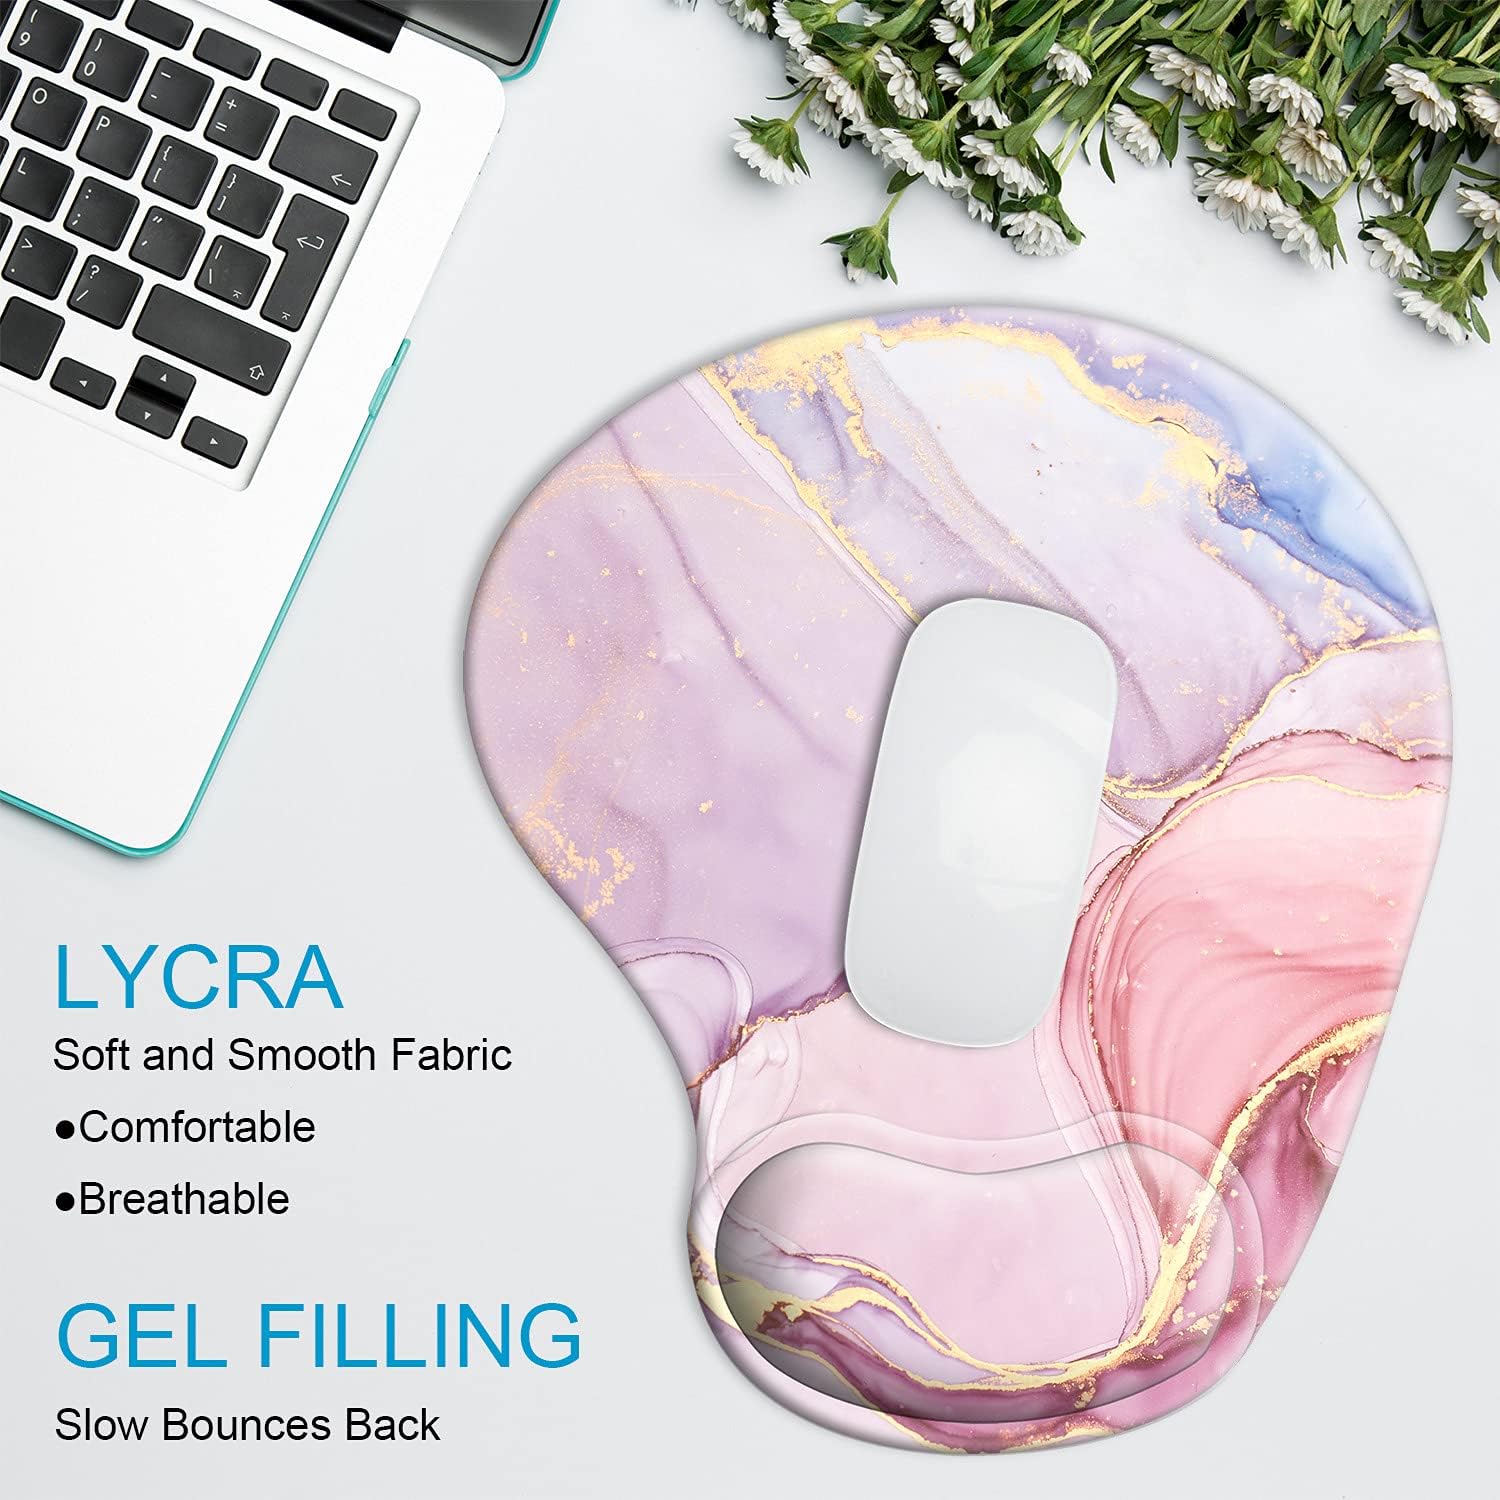 Ergonomic Mouse Pad with Wrist Rest Support Gel,Easy Typing & Pain Relief (Glitter Marble)